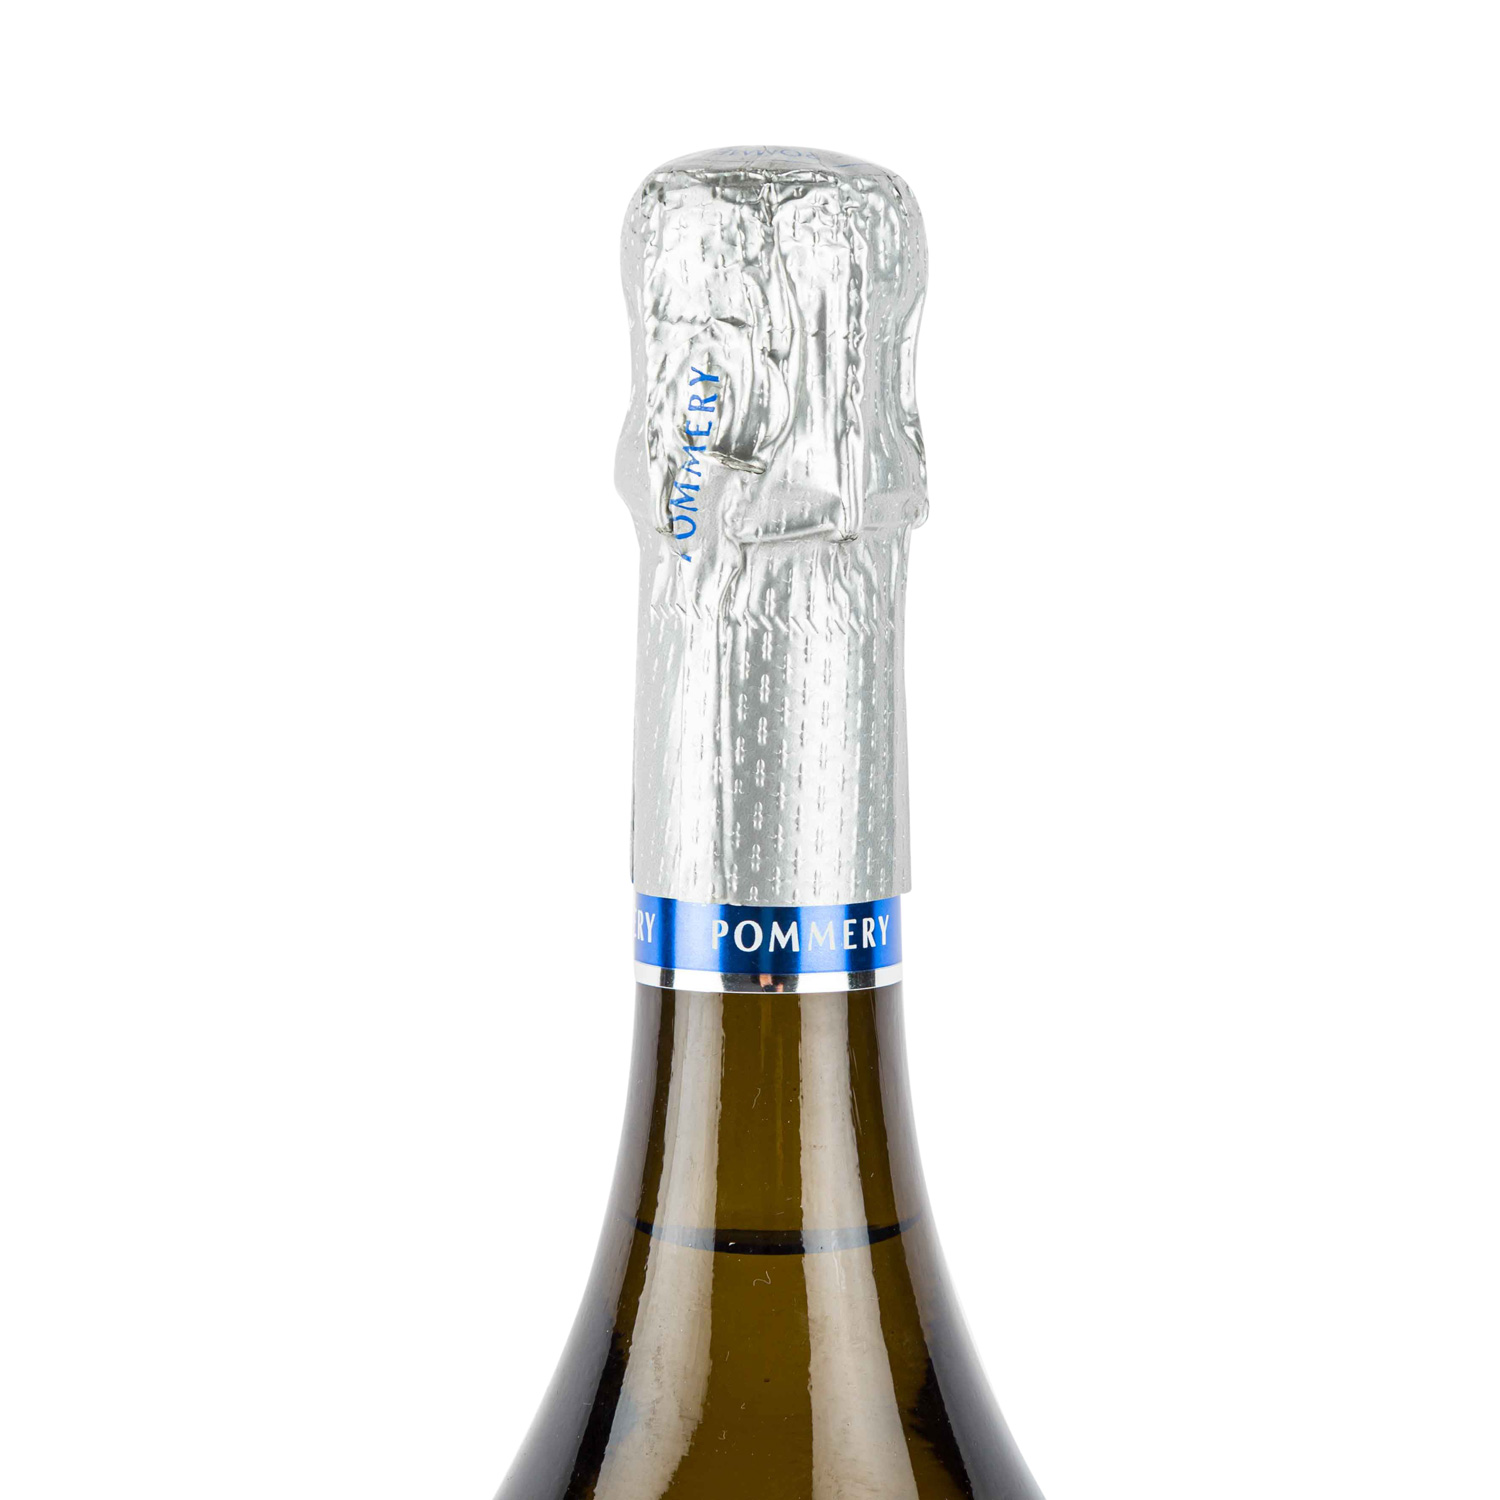 POMMERY 1 Flasche APANAGE PRESTIGE - Image 3 of 5